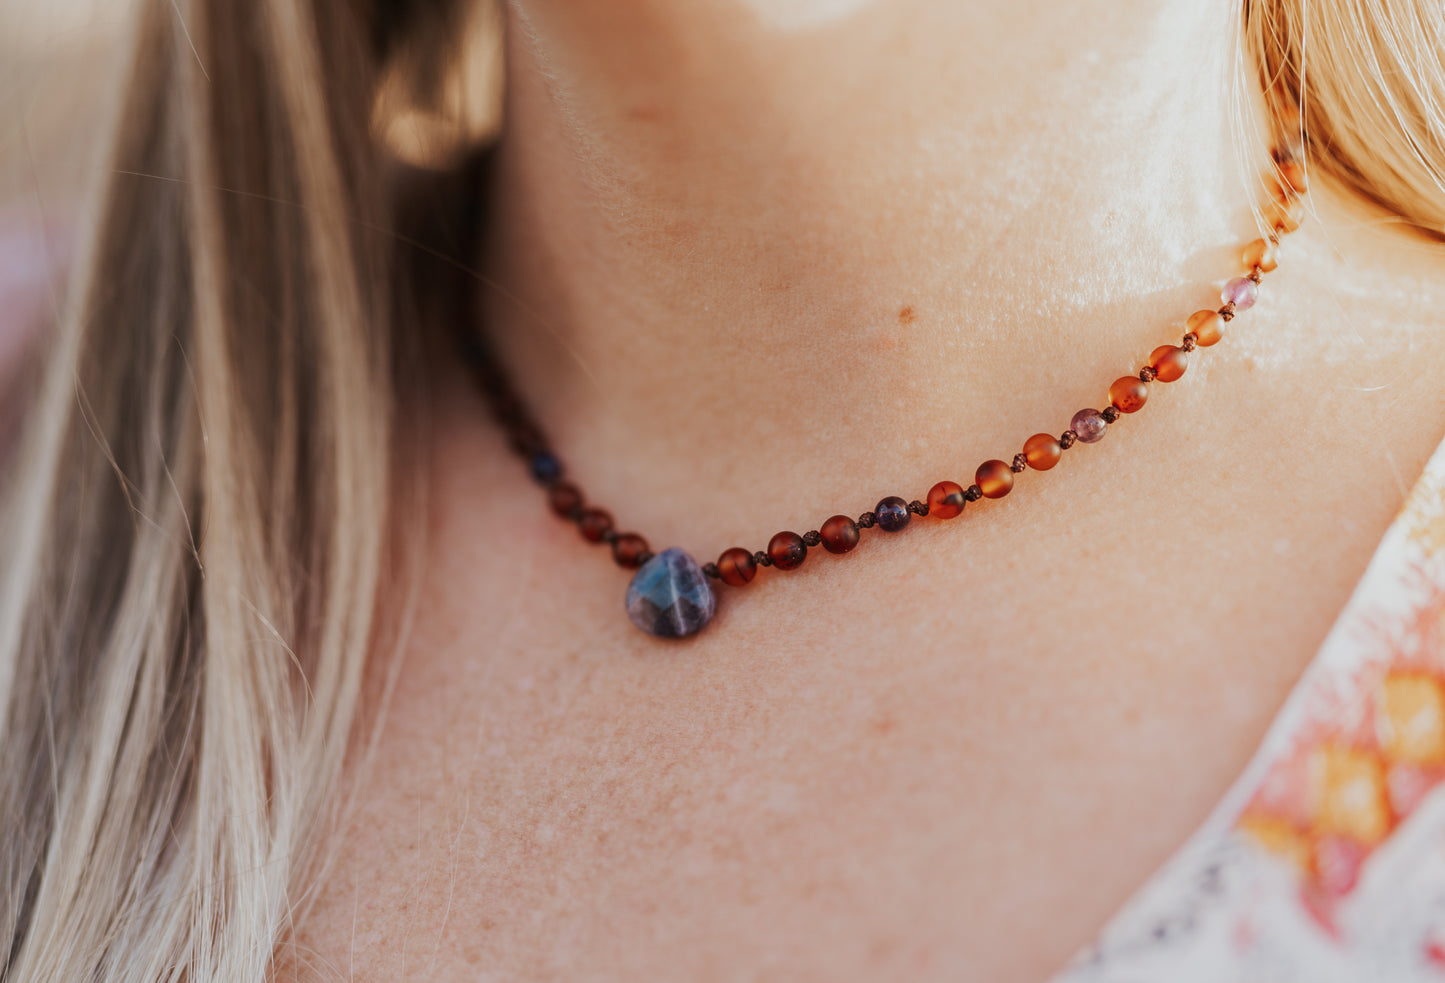 Create Your Own Baltic Amber and or Gemstone Necklace, Bracelet, Anklet, or Waistbeads- One on One Design